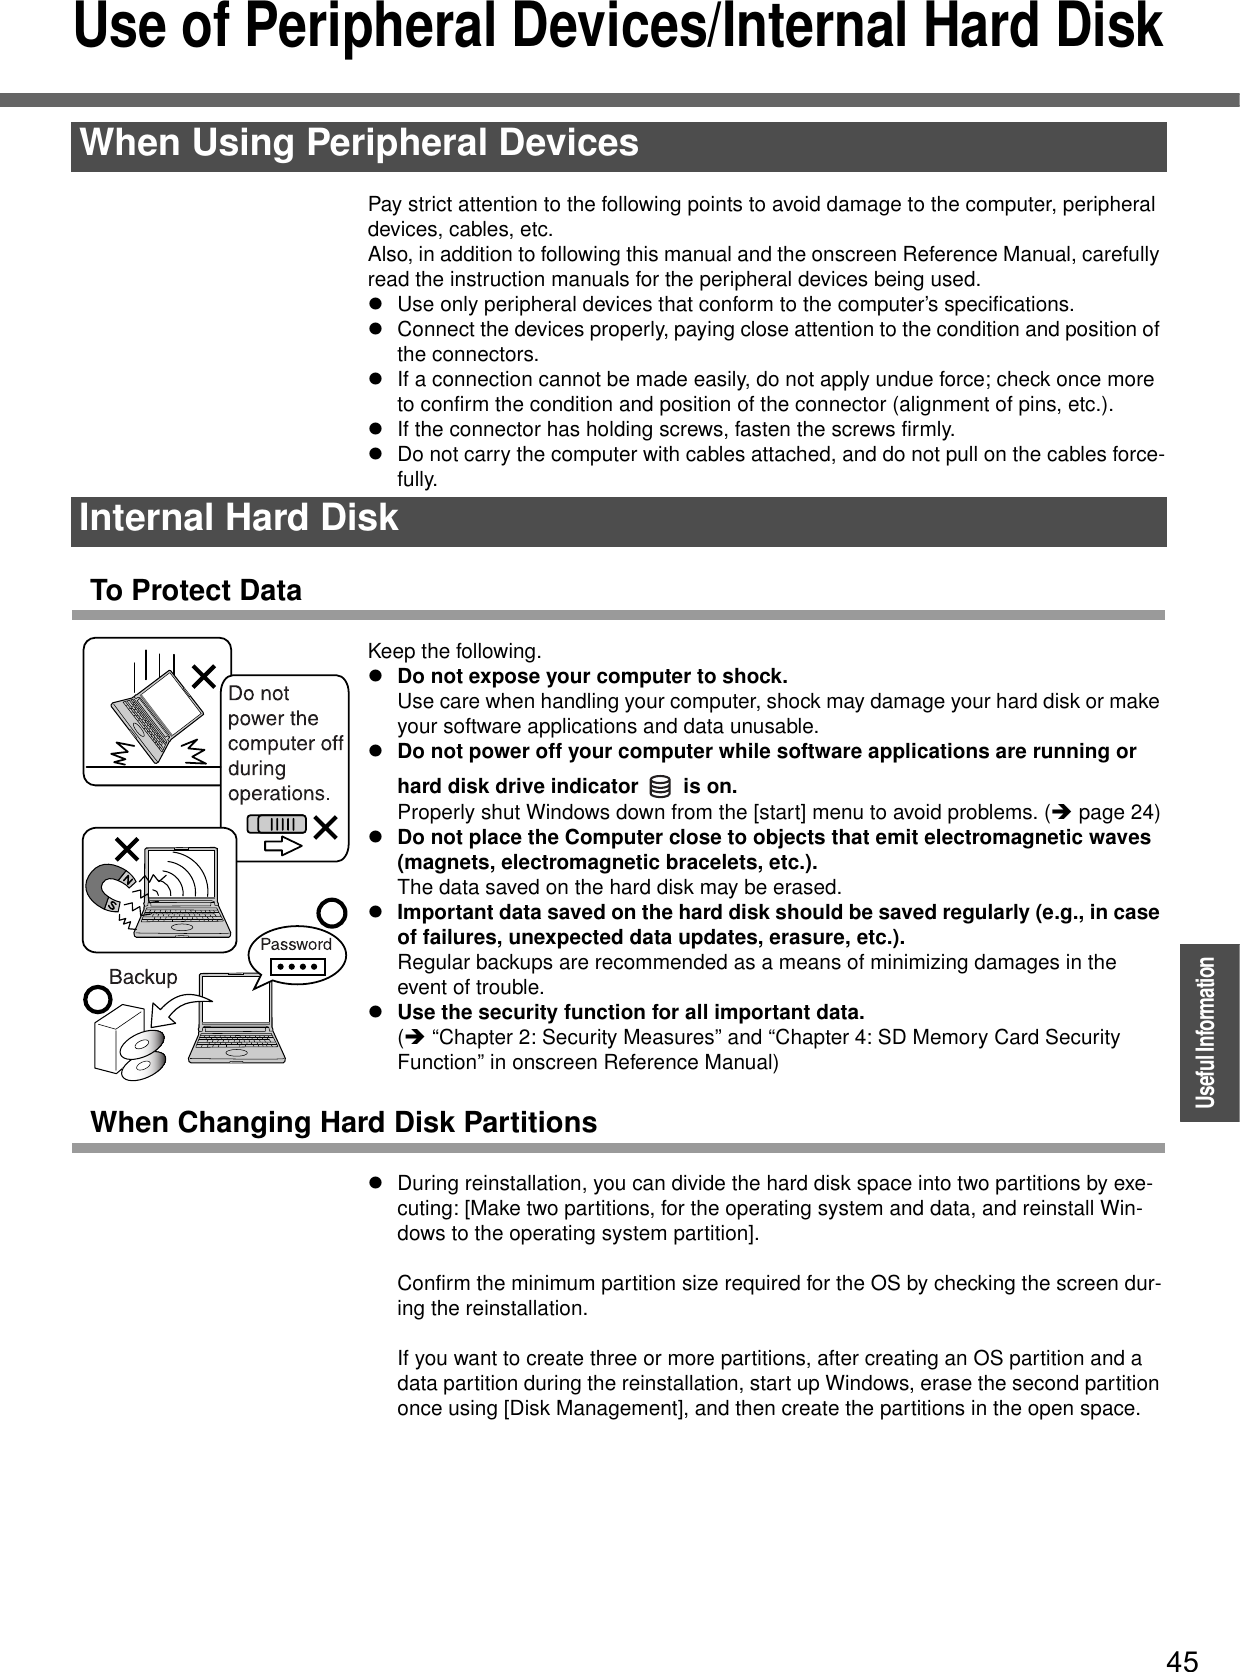 45OperationUseful InformationUse of Peripheral Devices/Internal Hard DiskPay strict attention to the following points to avoid damage to the computer, peripheral devices, cables, etc.Also, in addition to following this manual and the onscreen Reference Manual, carefully read the instruction manuals for the peripheral devices being used.zUse only peripheral devices that conform to the computer’s specifications.zConnect the devices properly, paying close attention to the condition and position of the connectors.zIf a connection cannot be made easily, do not apply undue force; check once more to confirm the condition and position of the connector (alignment of pins, etc.).zIf the connector has holding screws, fasten the screws firmly.zDo not carry the computer with cables attached, and do not pull on the cables force-fully.To Protect DataKeep the following.zDo not expose your computer to shock.Use care when handling your computer, shock may damage your hard disk or make your software applications and data unusable.zDo not power off your computer while software applications are running or hard disk drive indicator   is on. Properly shut Windows down from the [start] menu to avoid problems. (Îpage 24)zDo not place the Computer close to objects that emit electromagnetic waves (magnets, electromagnetic bracelets, etc.).The data saved on the hard disk may be erased.zImportant data saved on the hard disk should be saved regularly (e.g., in case of failures, unexpected data updates, erasure, etc.).Regular backups are recommended as a means of minimizing damages in the event of trouble.zUse the security function for all important data.(Î “Chapter 2: Security Measures” and “Chapter 4: SD Memory Card Security Function” in onscreen Reference Manual)When Changing Hard Disk PartitionszDuring reinstallation, you can divide the hard disk space into two partitions by exe-cuting: [Make two partitions, for the operating system and data, and reinstall Win-dows to the operating system partition].Confirm the minimum partition size required for the OS by checking the screen dur-ing the reinstallation.If you want to create three or more partitions, after creating an OS partition and a data partition during the reinstallation, start up Windows, erase the second partition once using [Disk Management], and then create the partitions in the open space.When Using Peripheral DevicesInternal Hard Disk